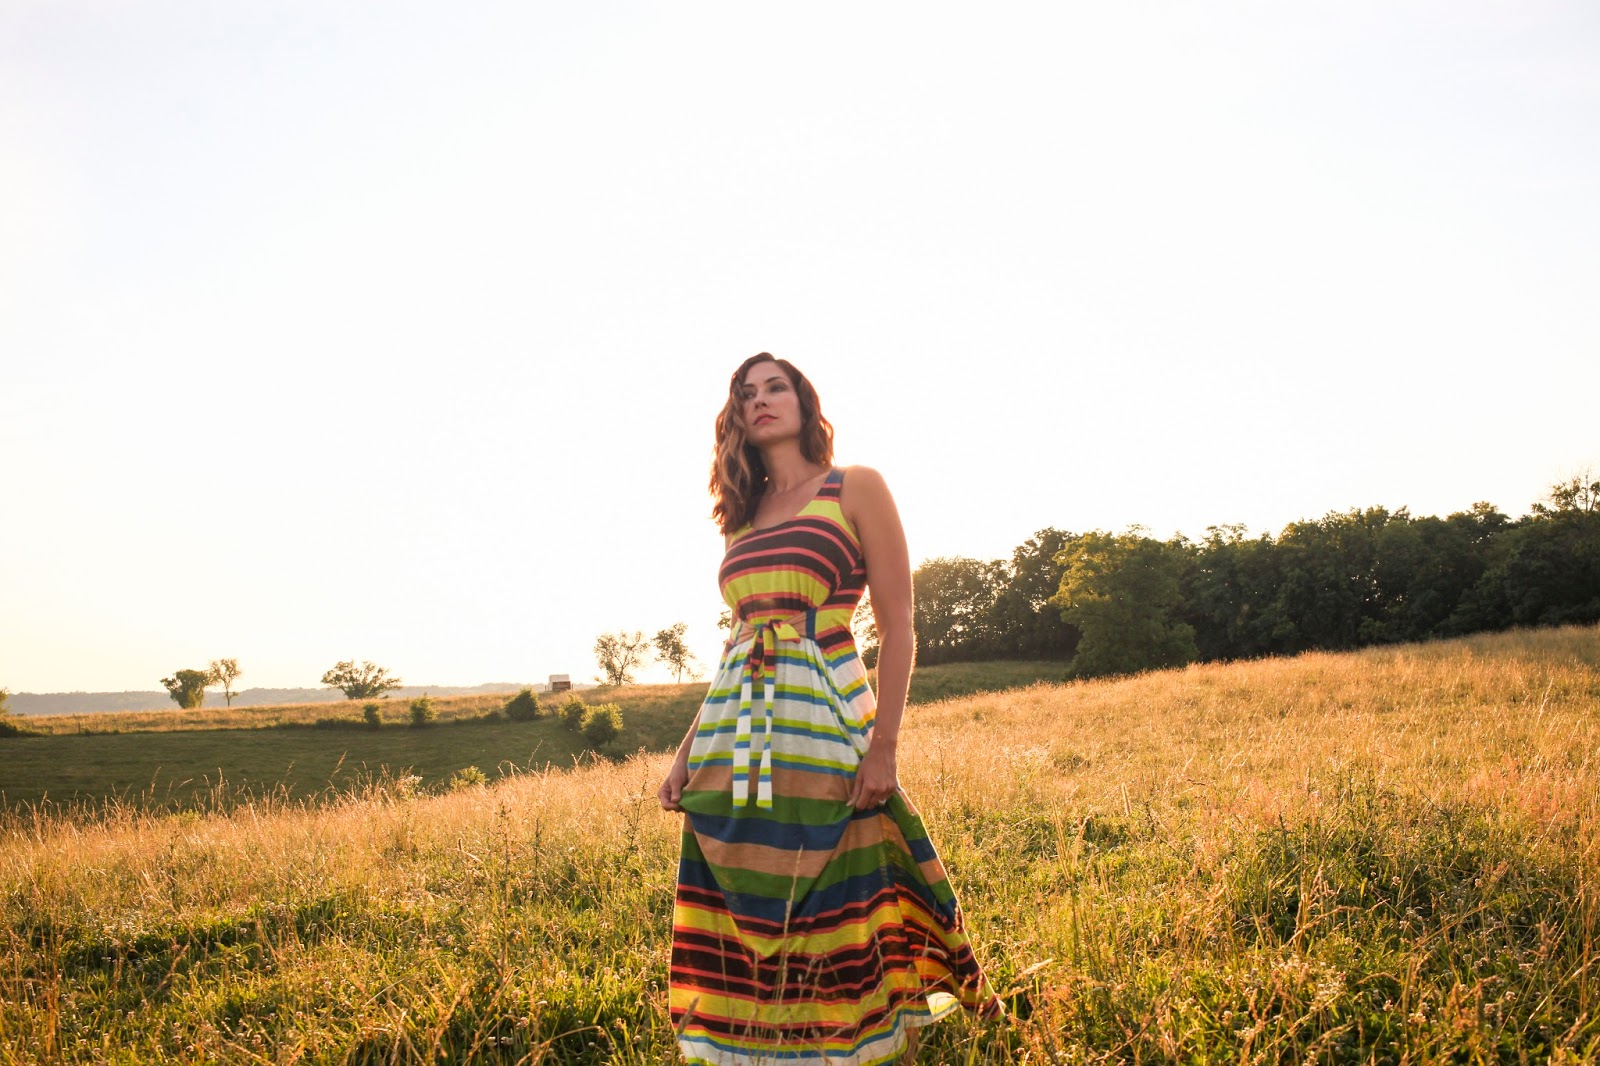 Amy West walks through the hills of Kentucky in a colorful maxi dress